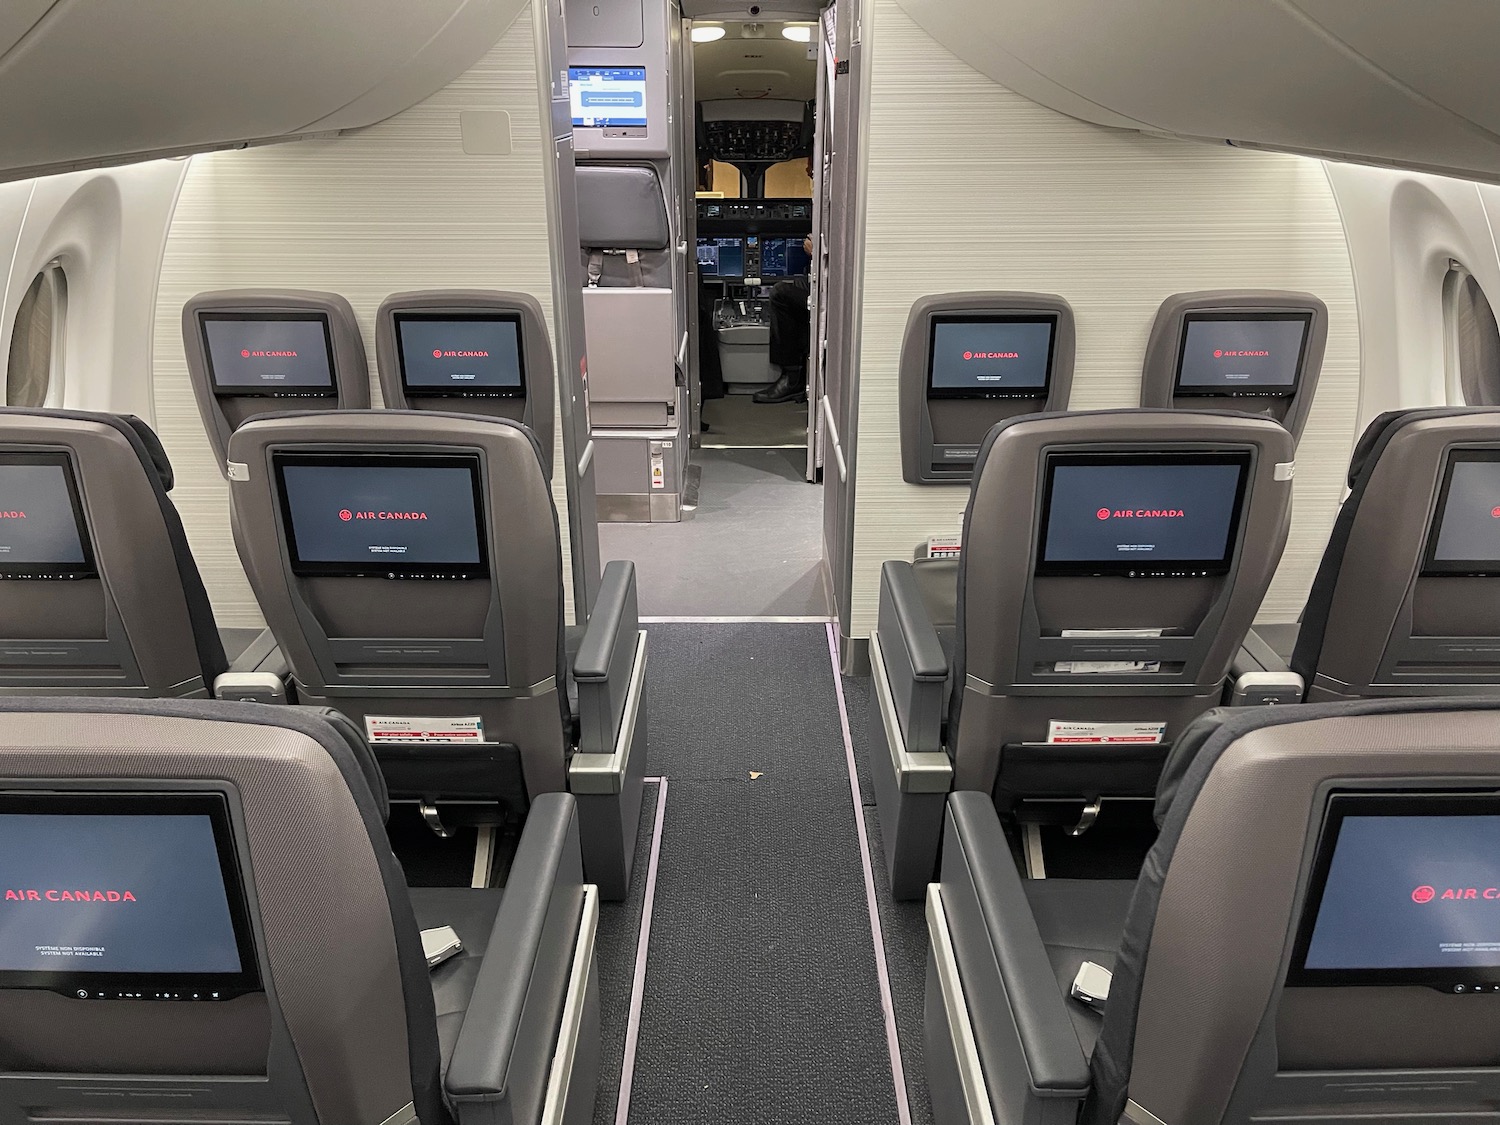 the inside of an airplane with seats and monitors